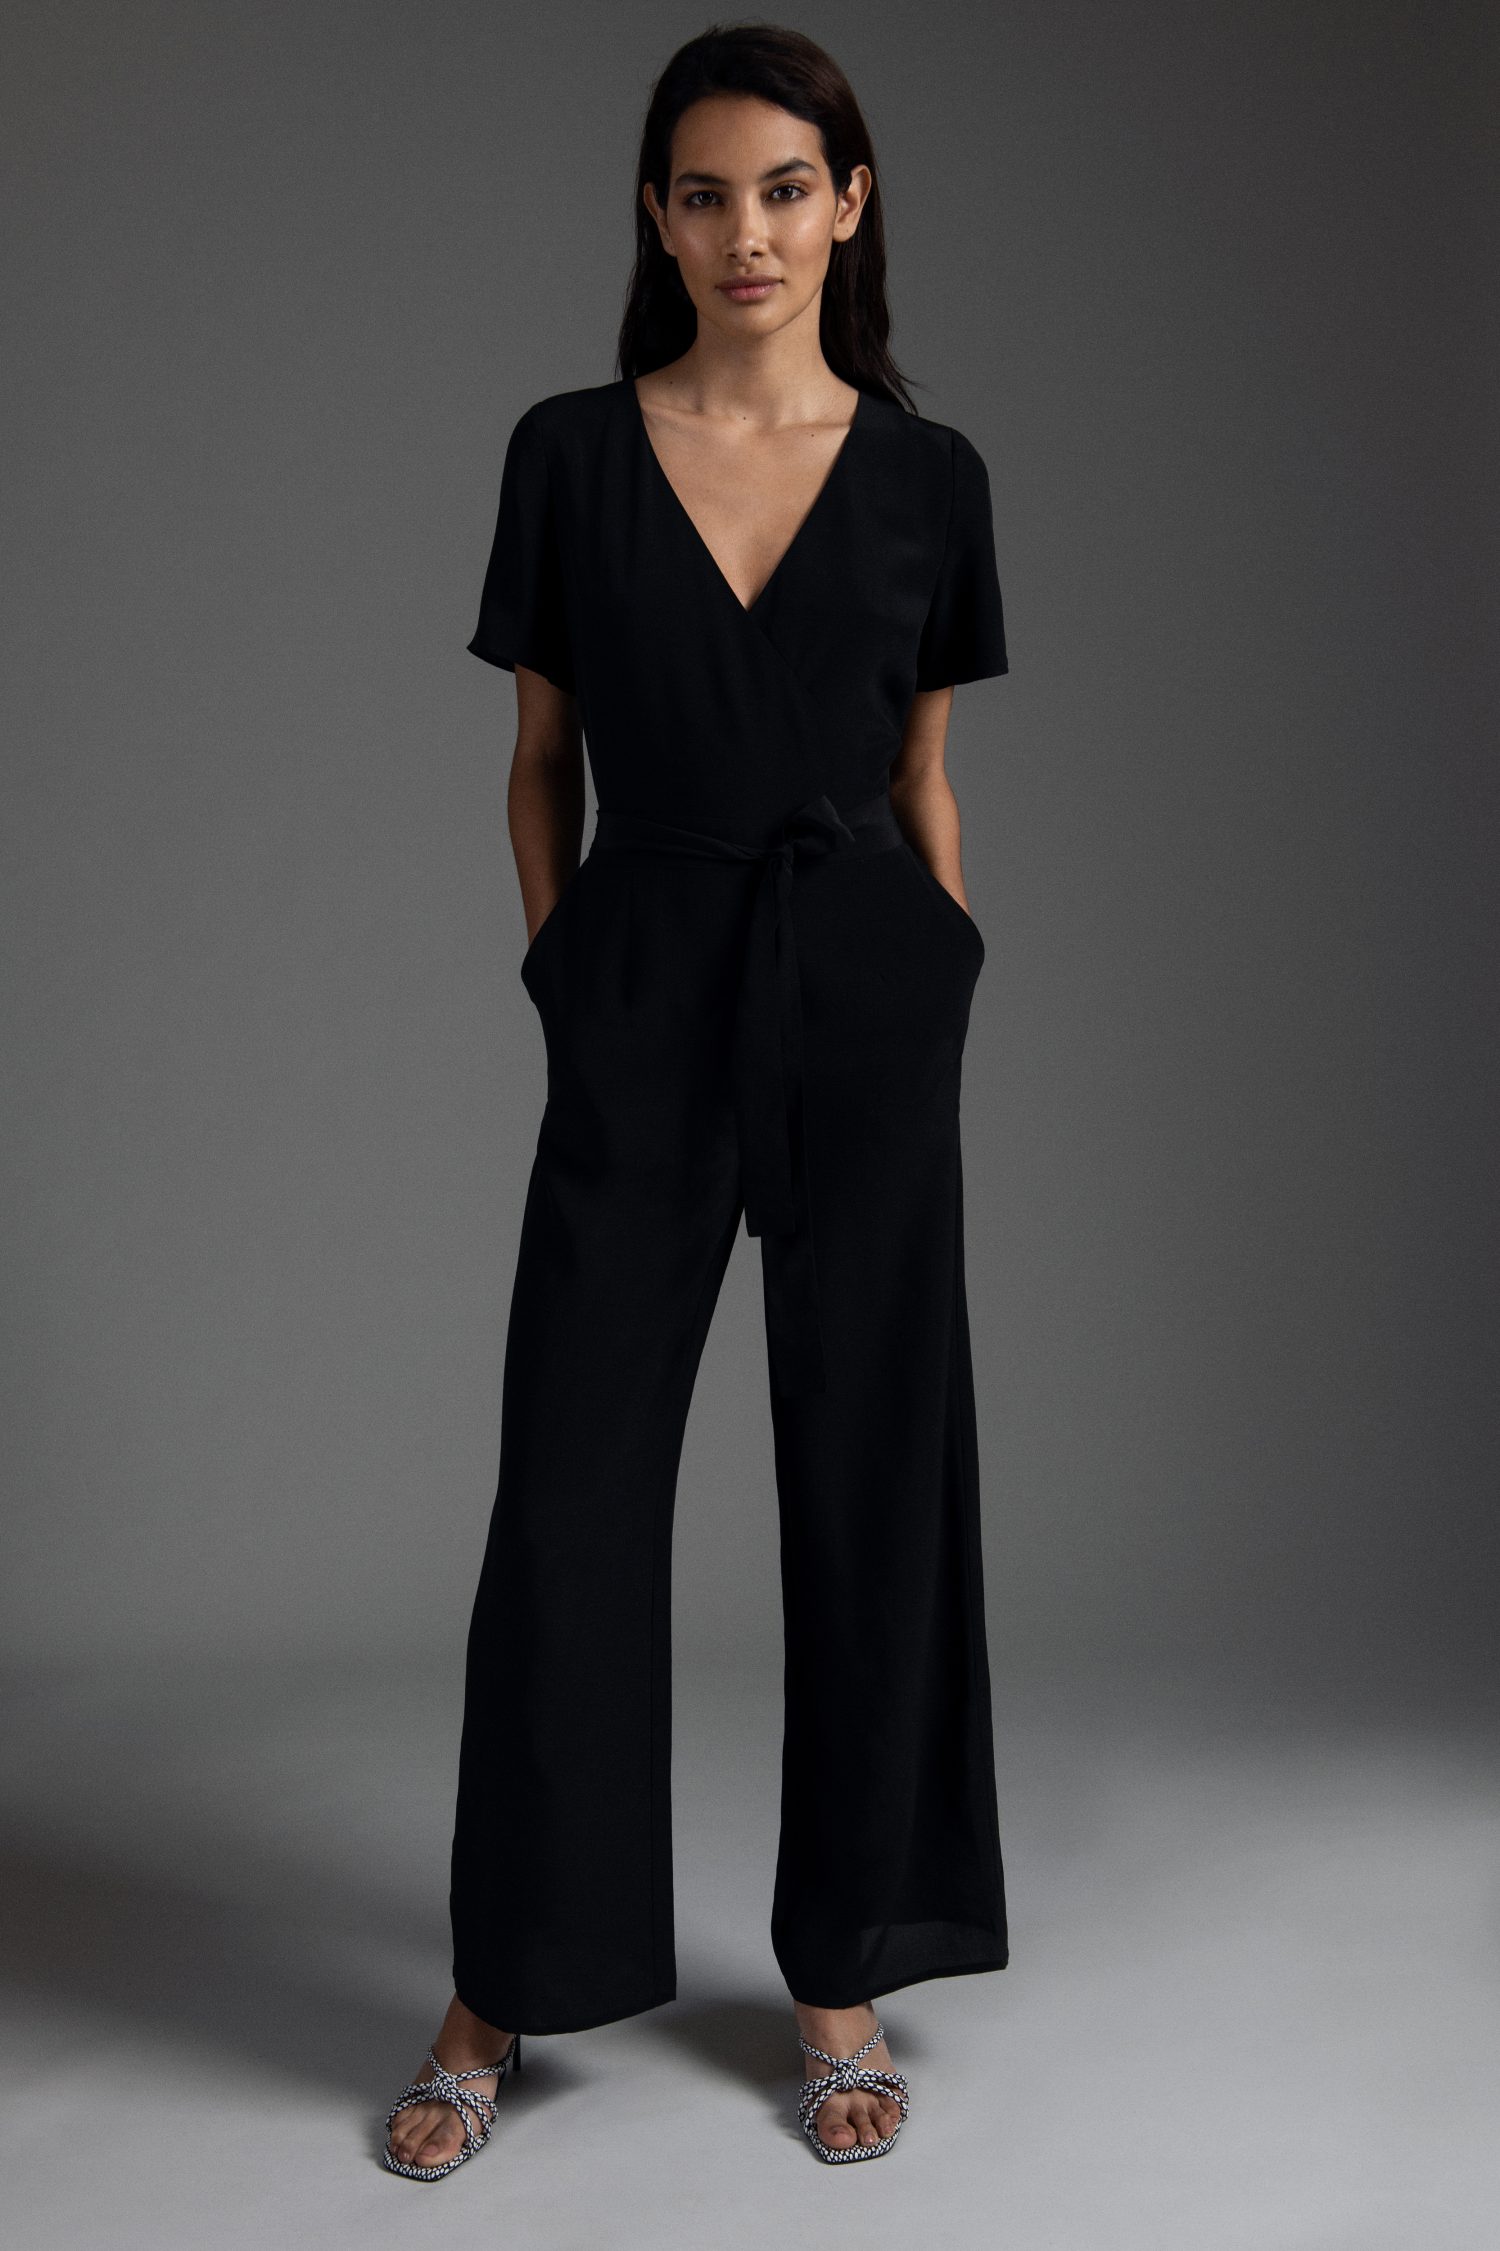 Luciana Black Jumpsuit - Ethereal London